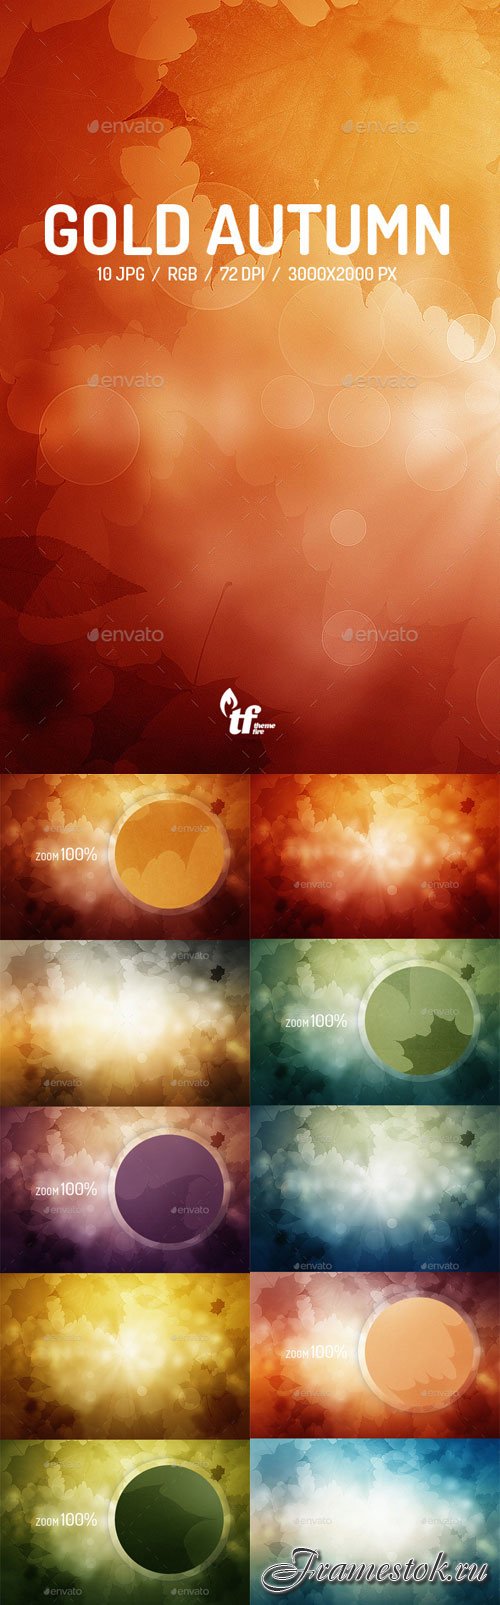 Gold Autumn Backgrounds